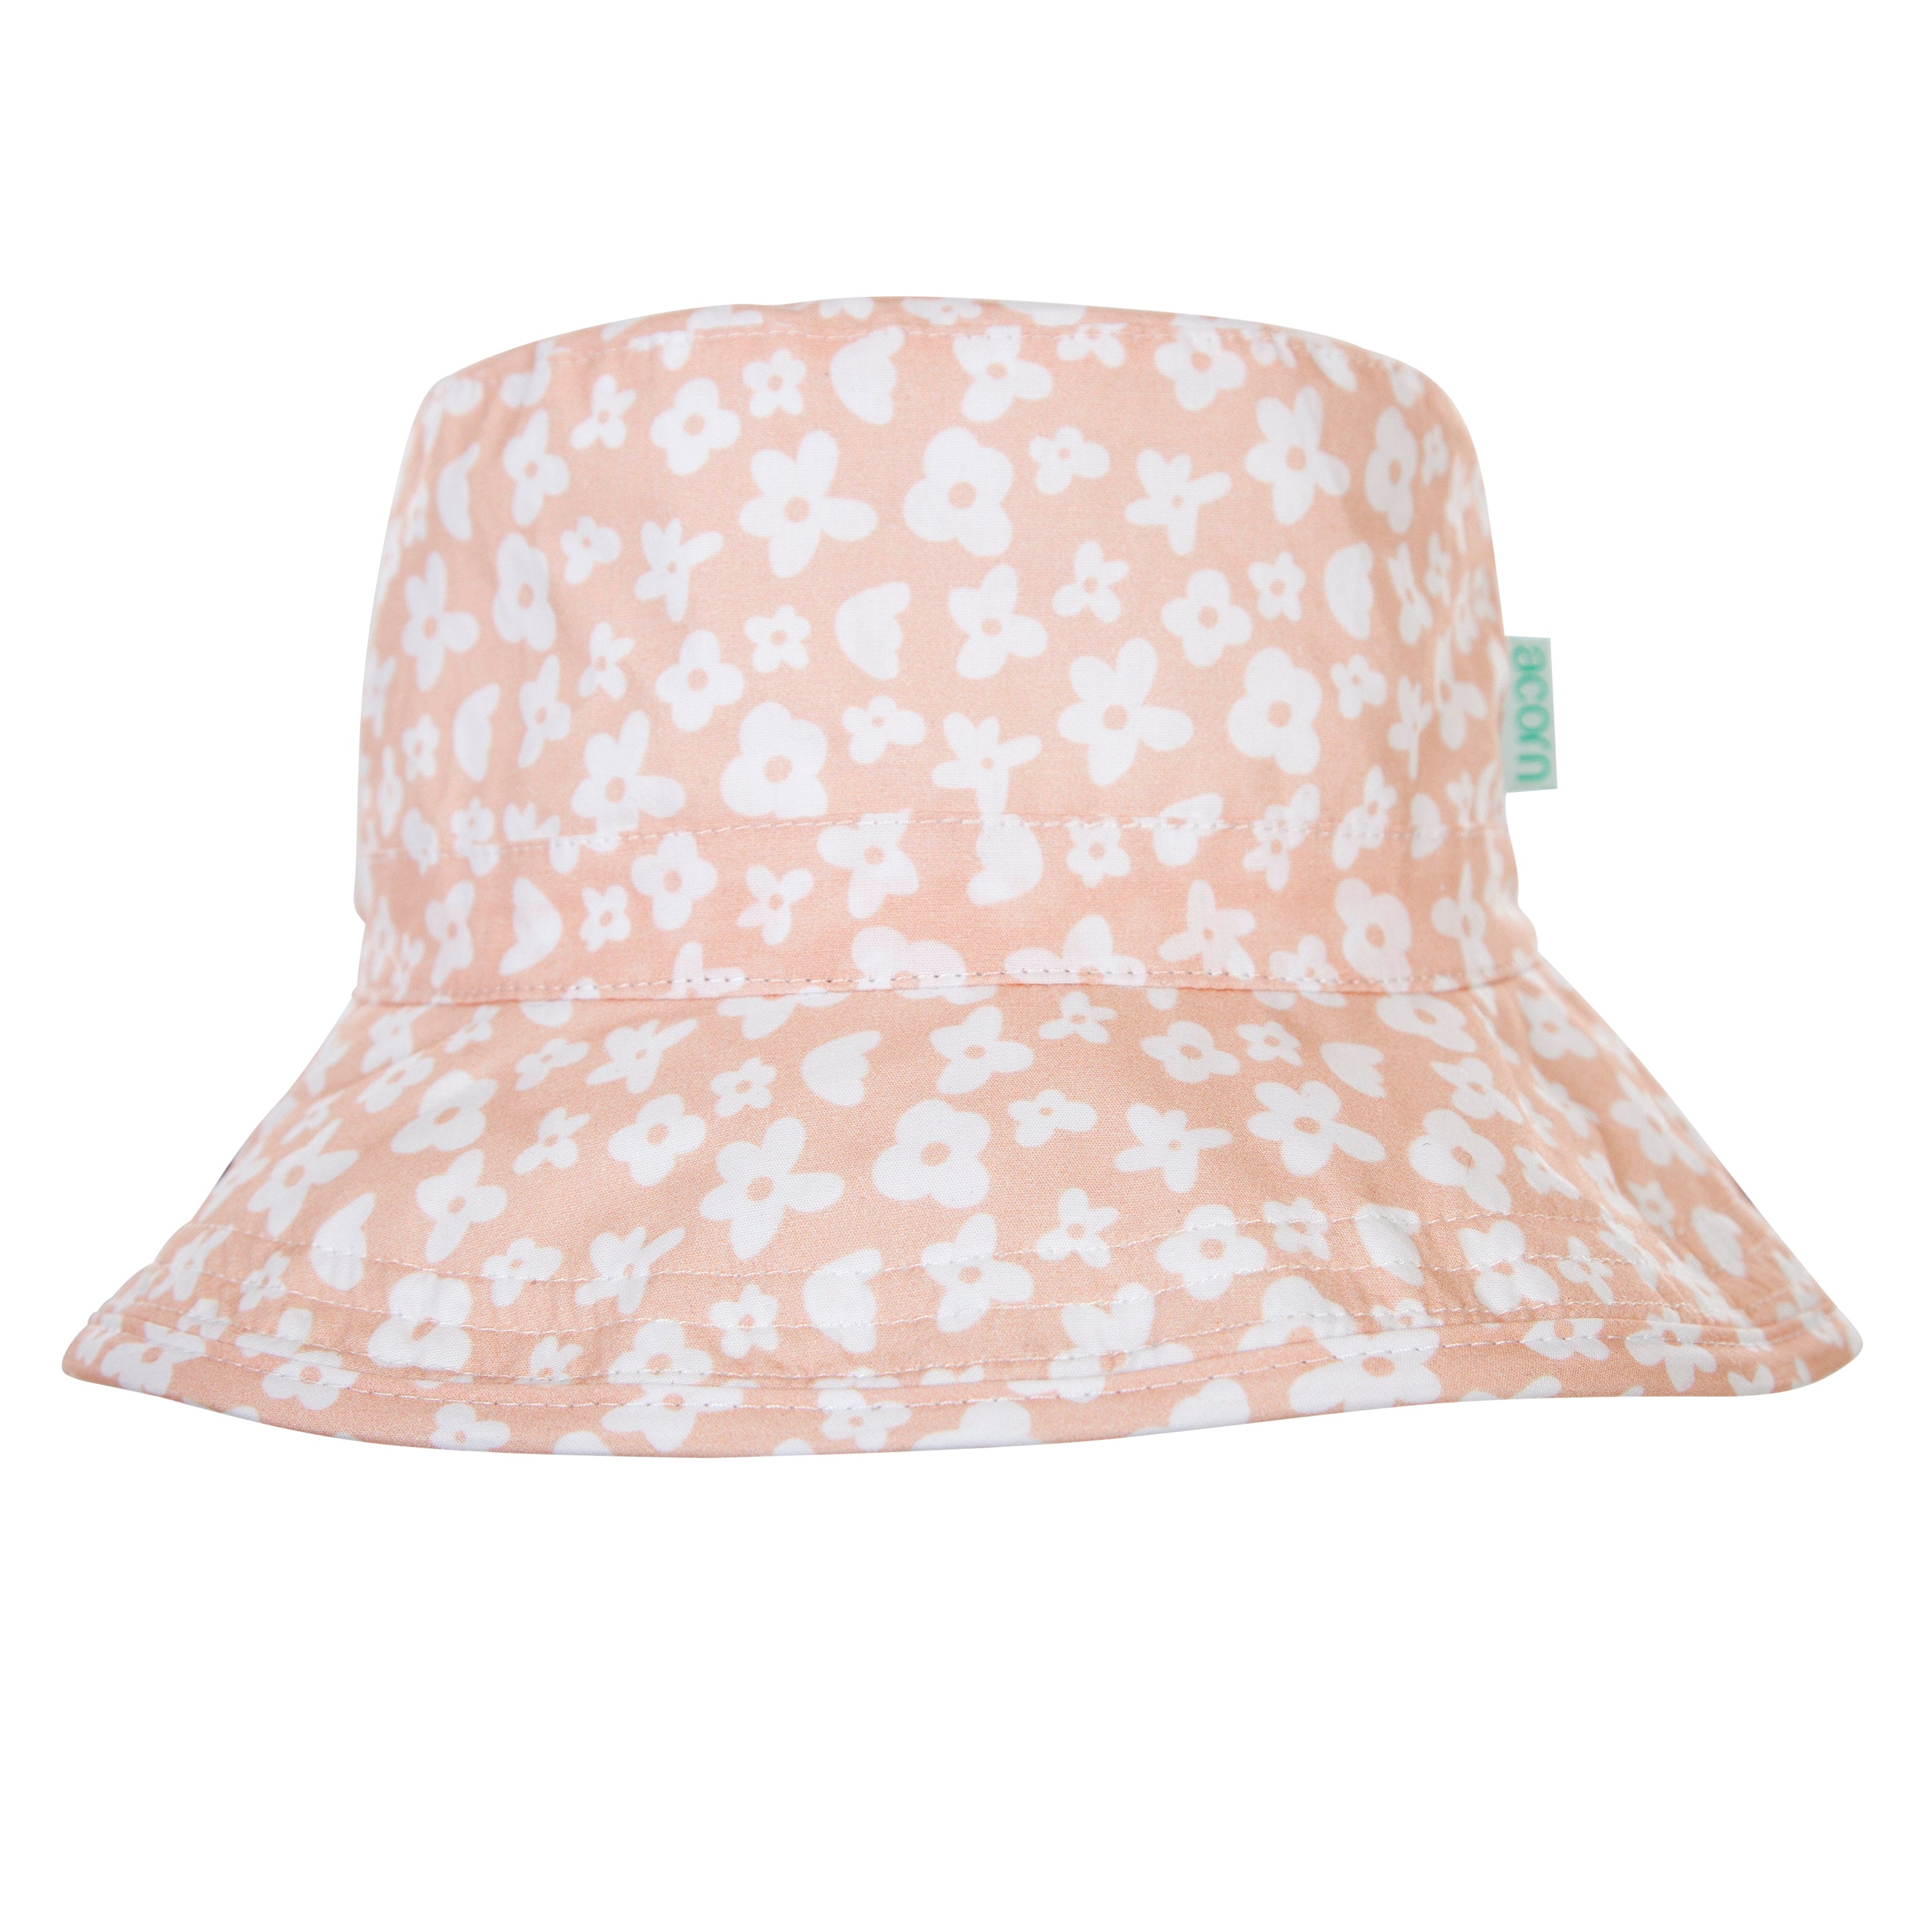 Acorn - Camille Bucket Hat (Pink and White)